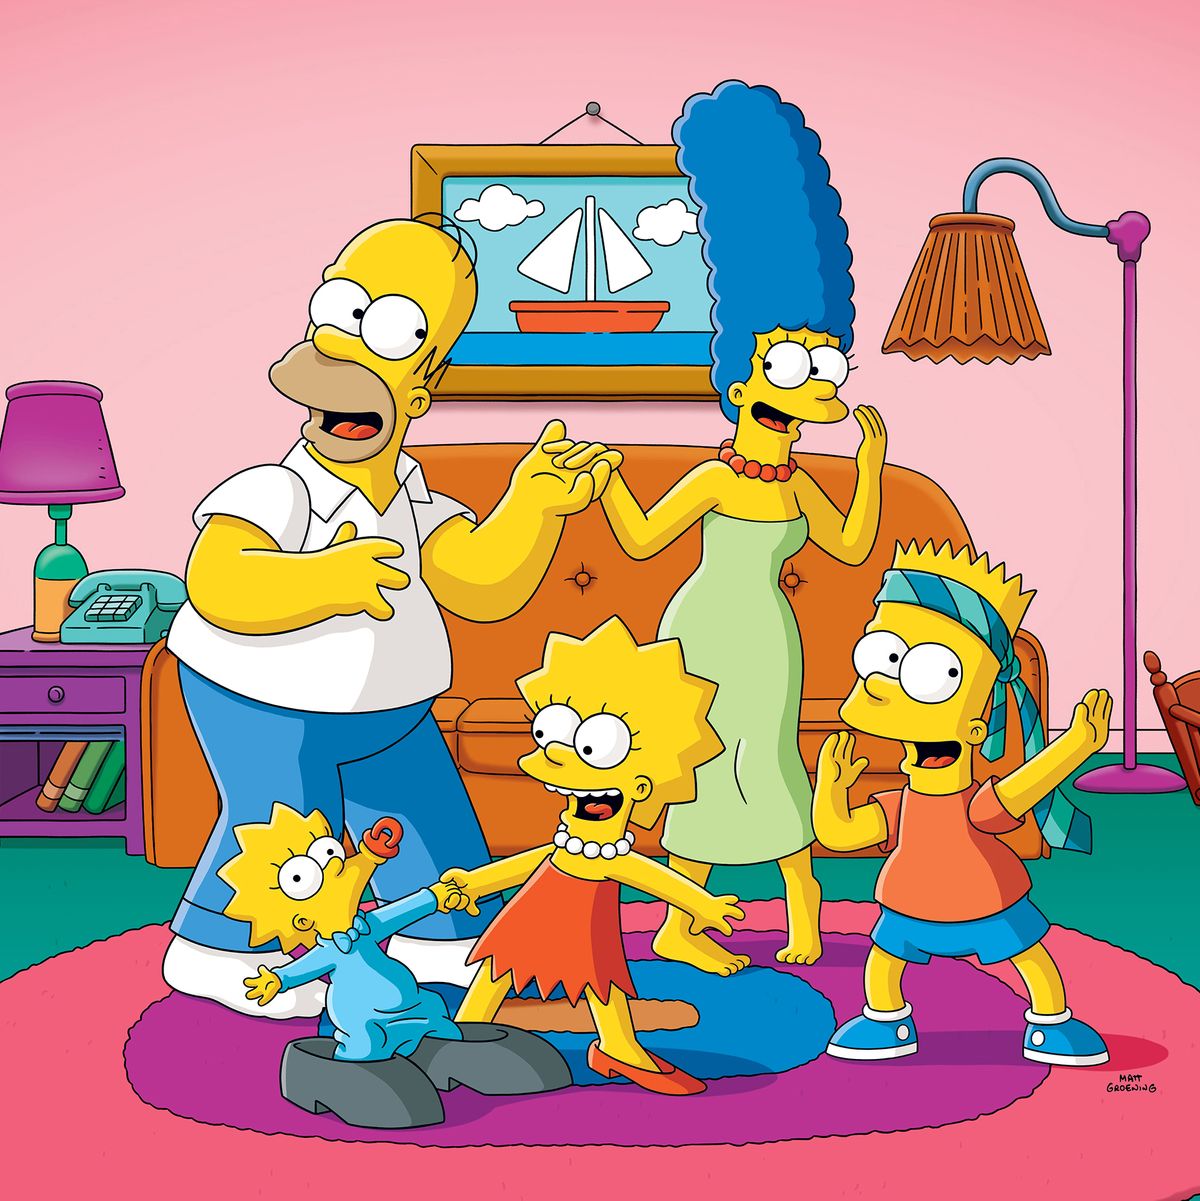 The Simpsons 2f3adf8cc193d63e6b29a62211341dc274-06-the-simpsons.rsquare.w1200